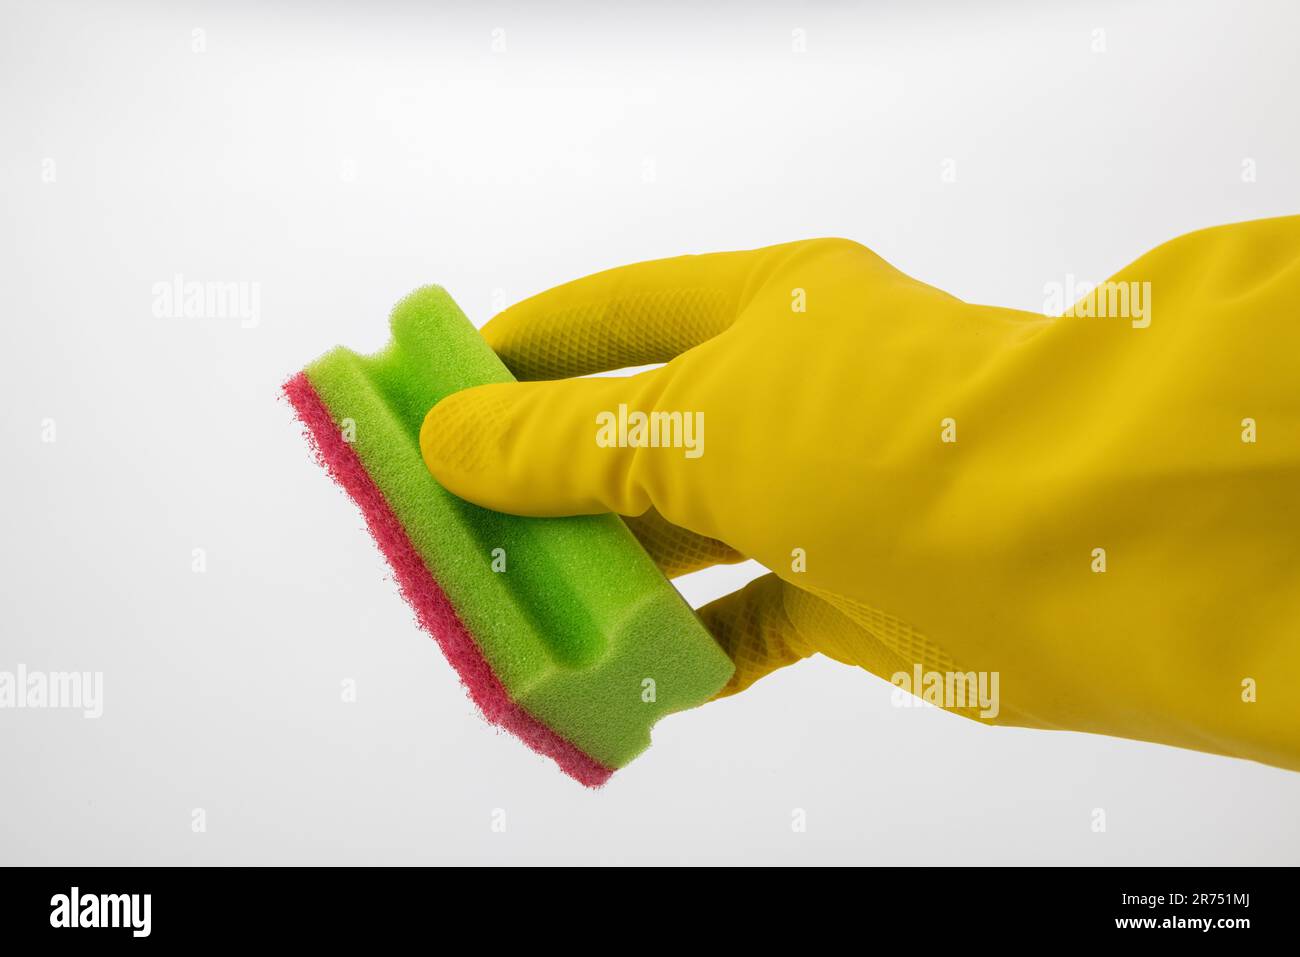 Hand with yellow protective glove holds cleaning sponge with handle green-red, white background, Stock Photo